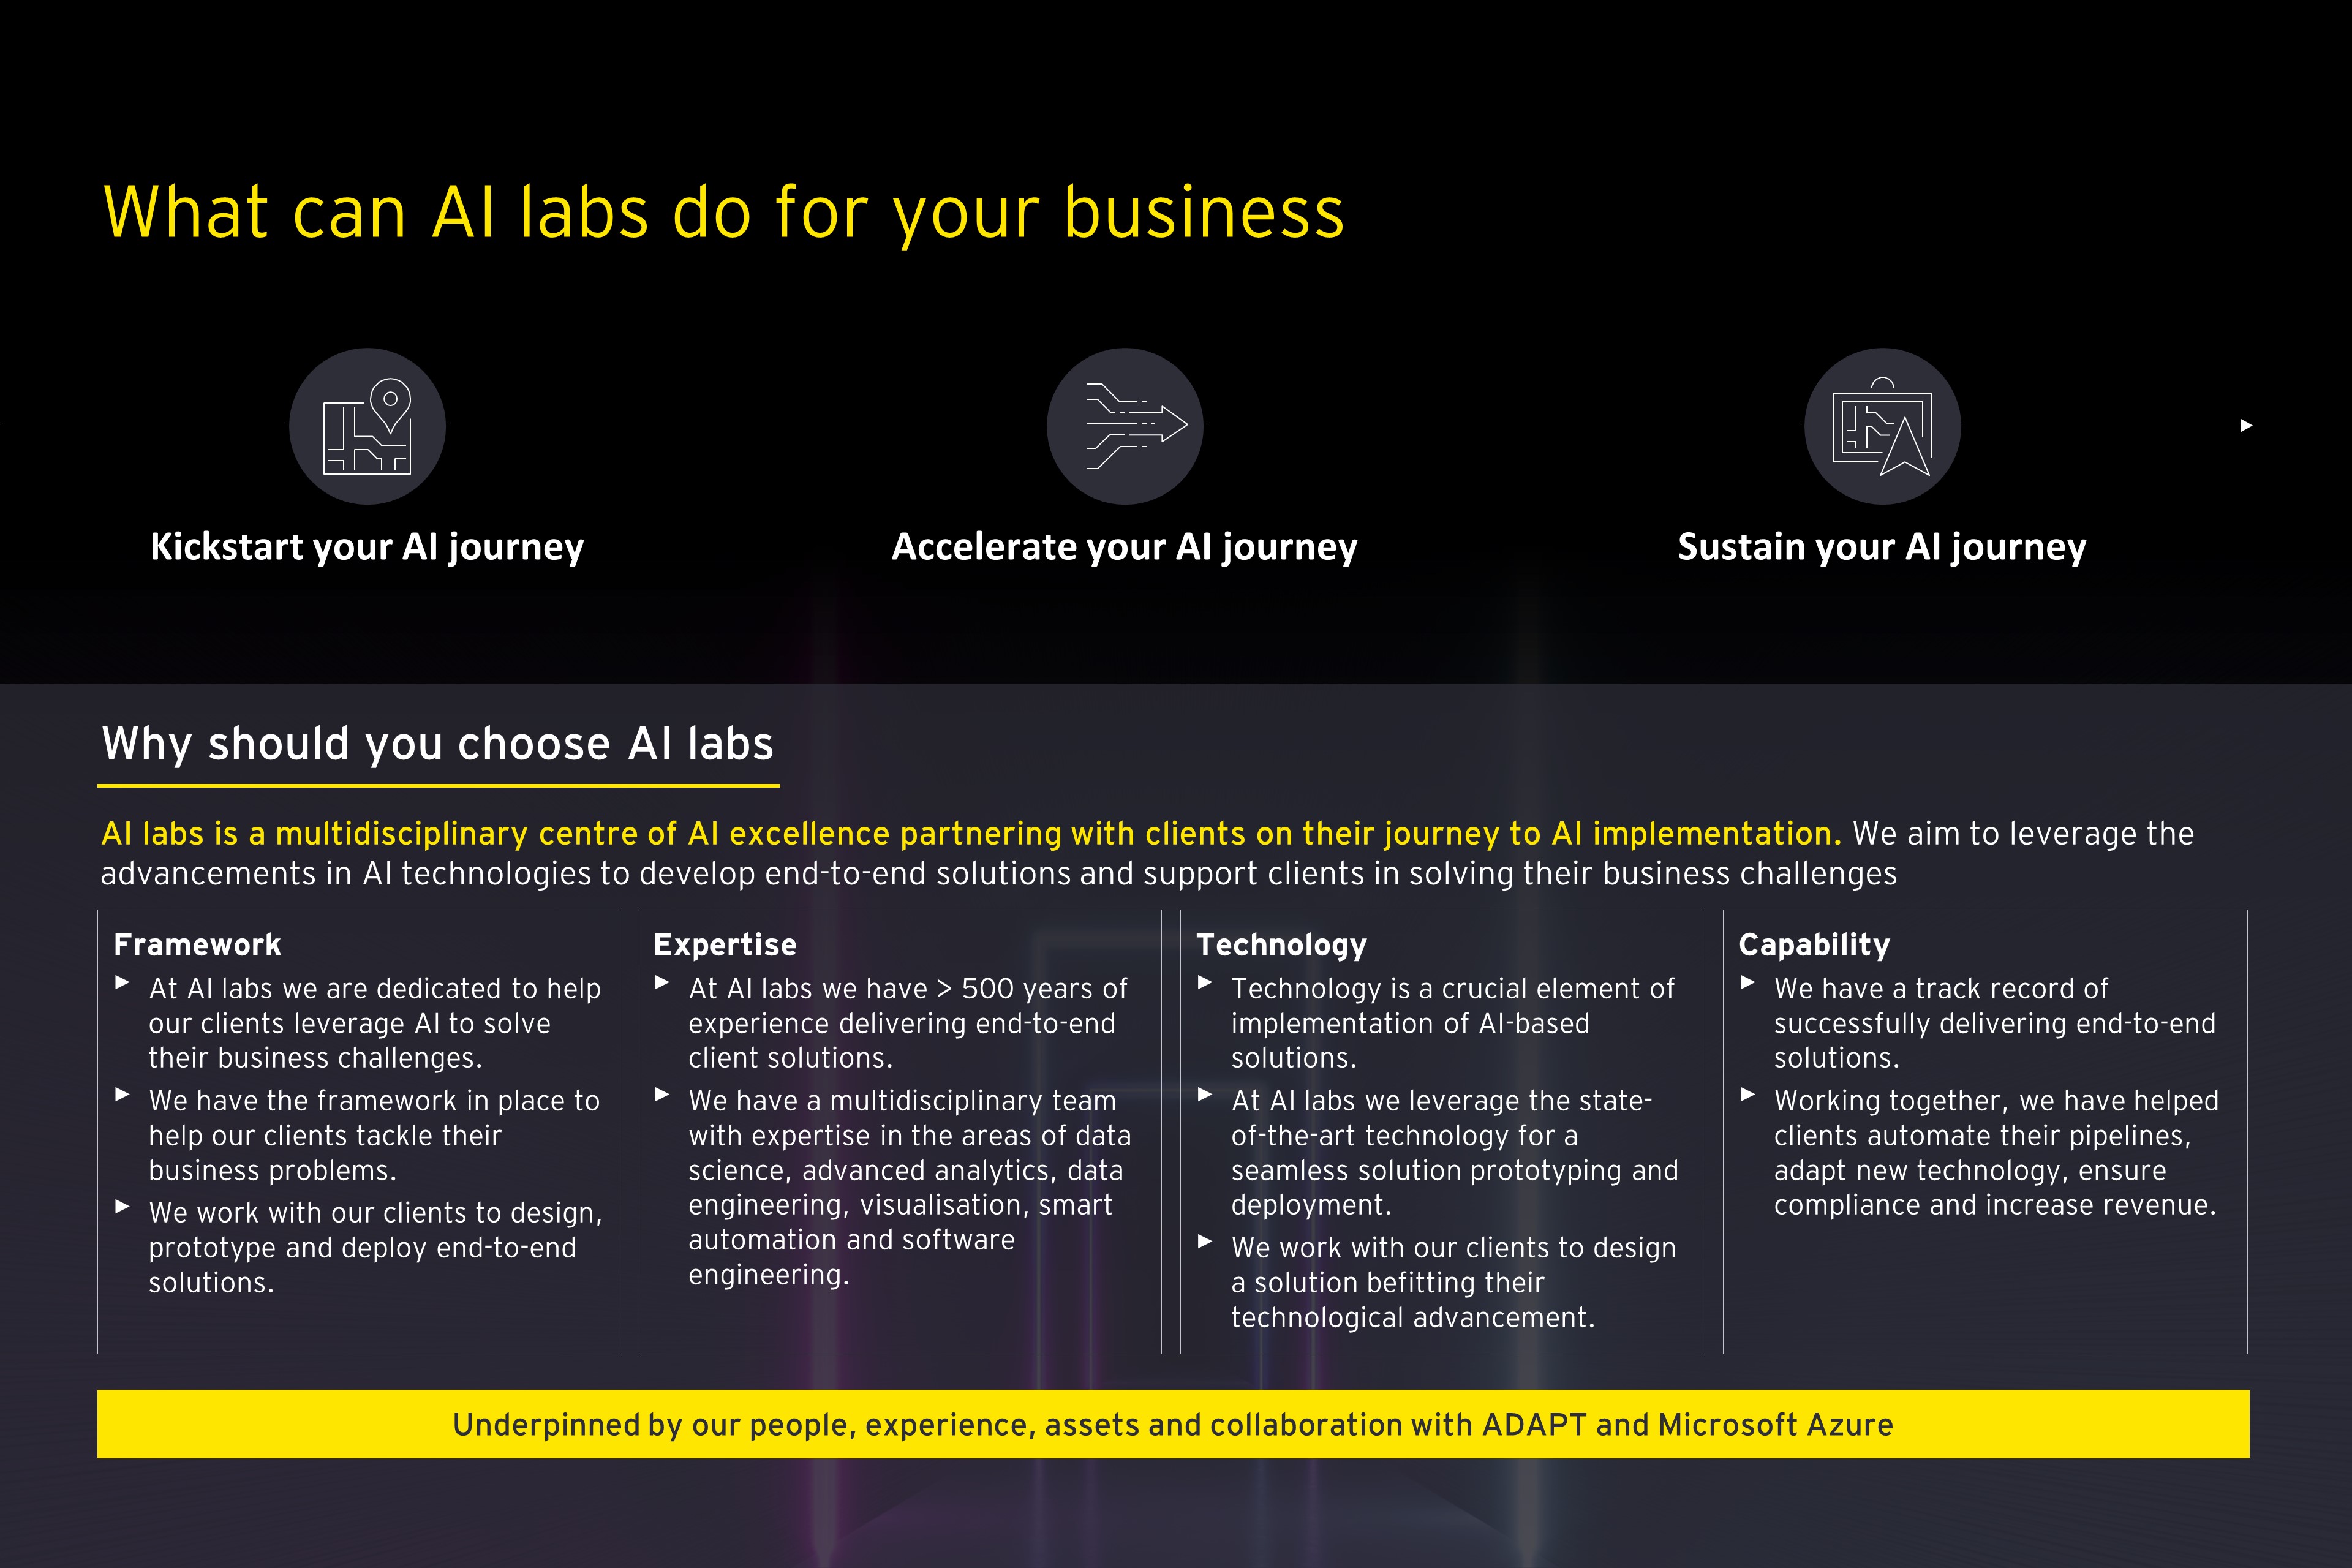 What can AI Lab do for your business